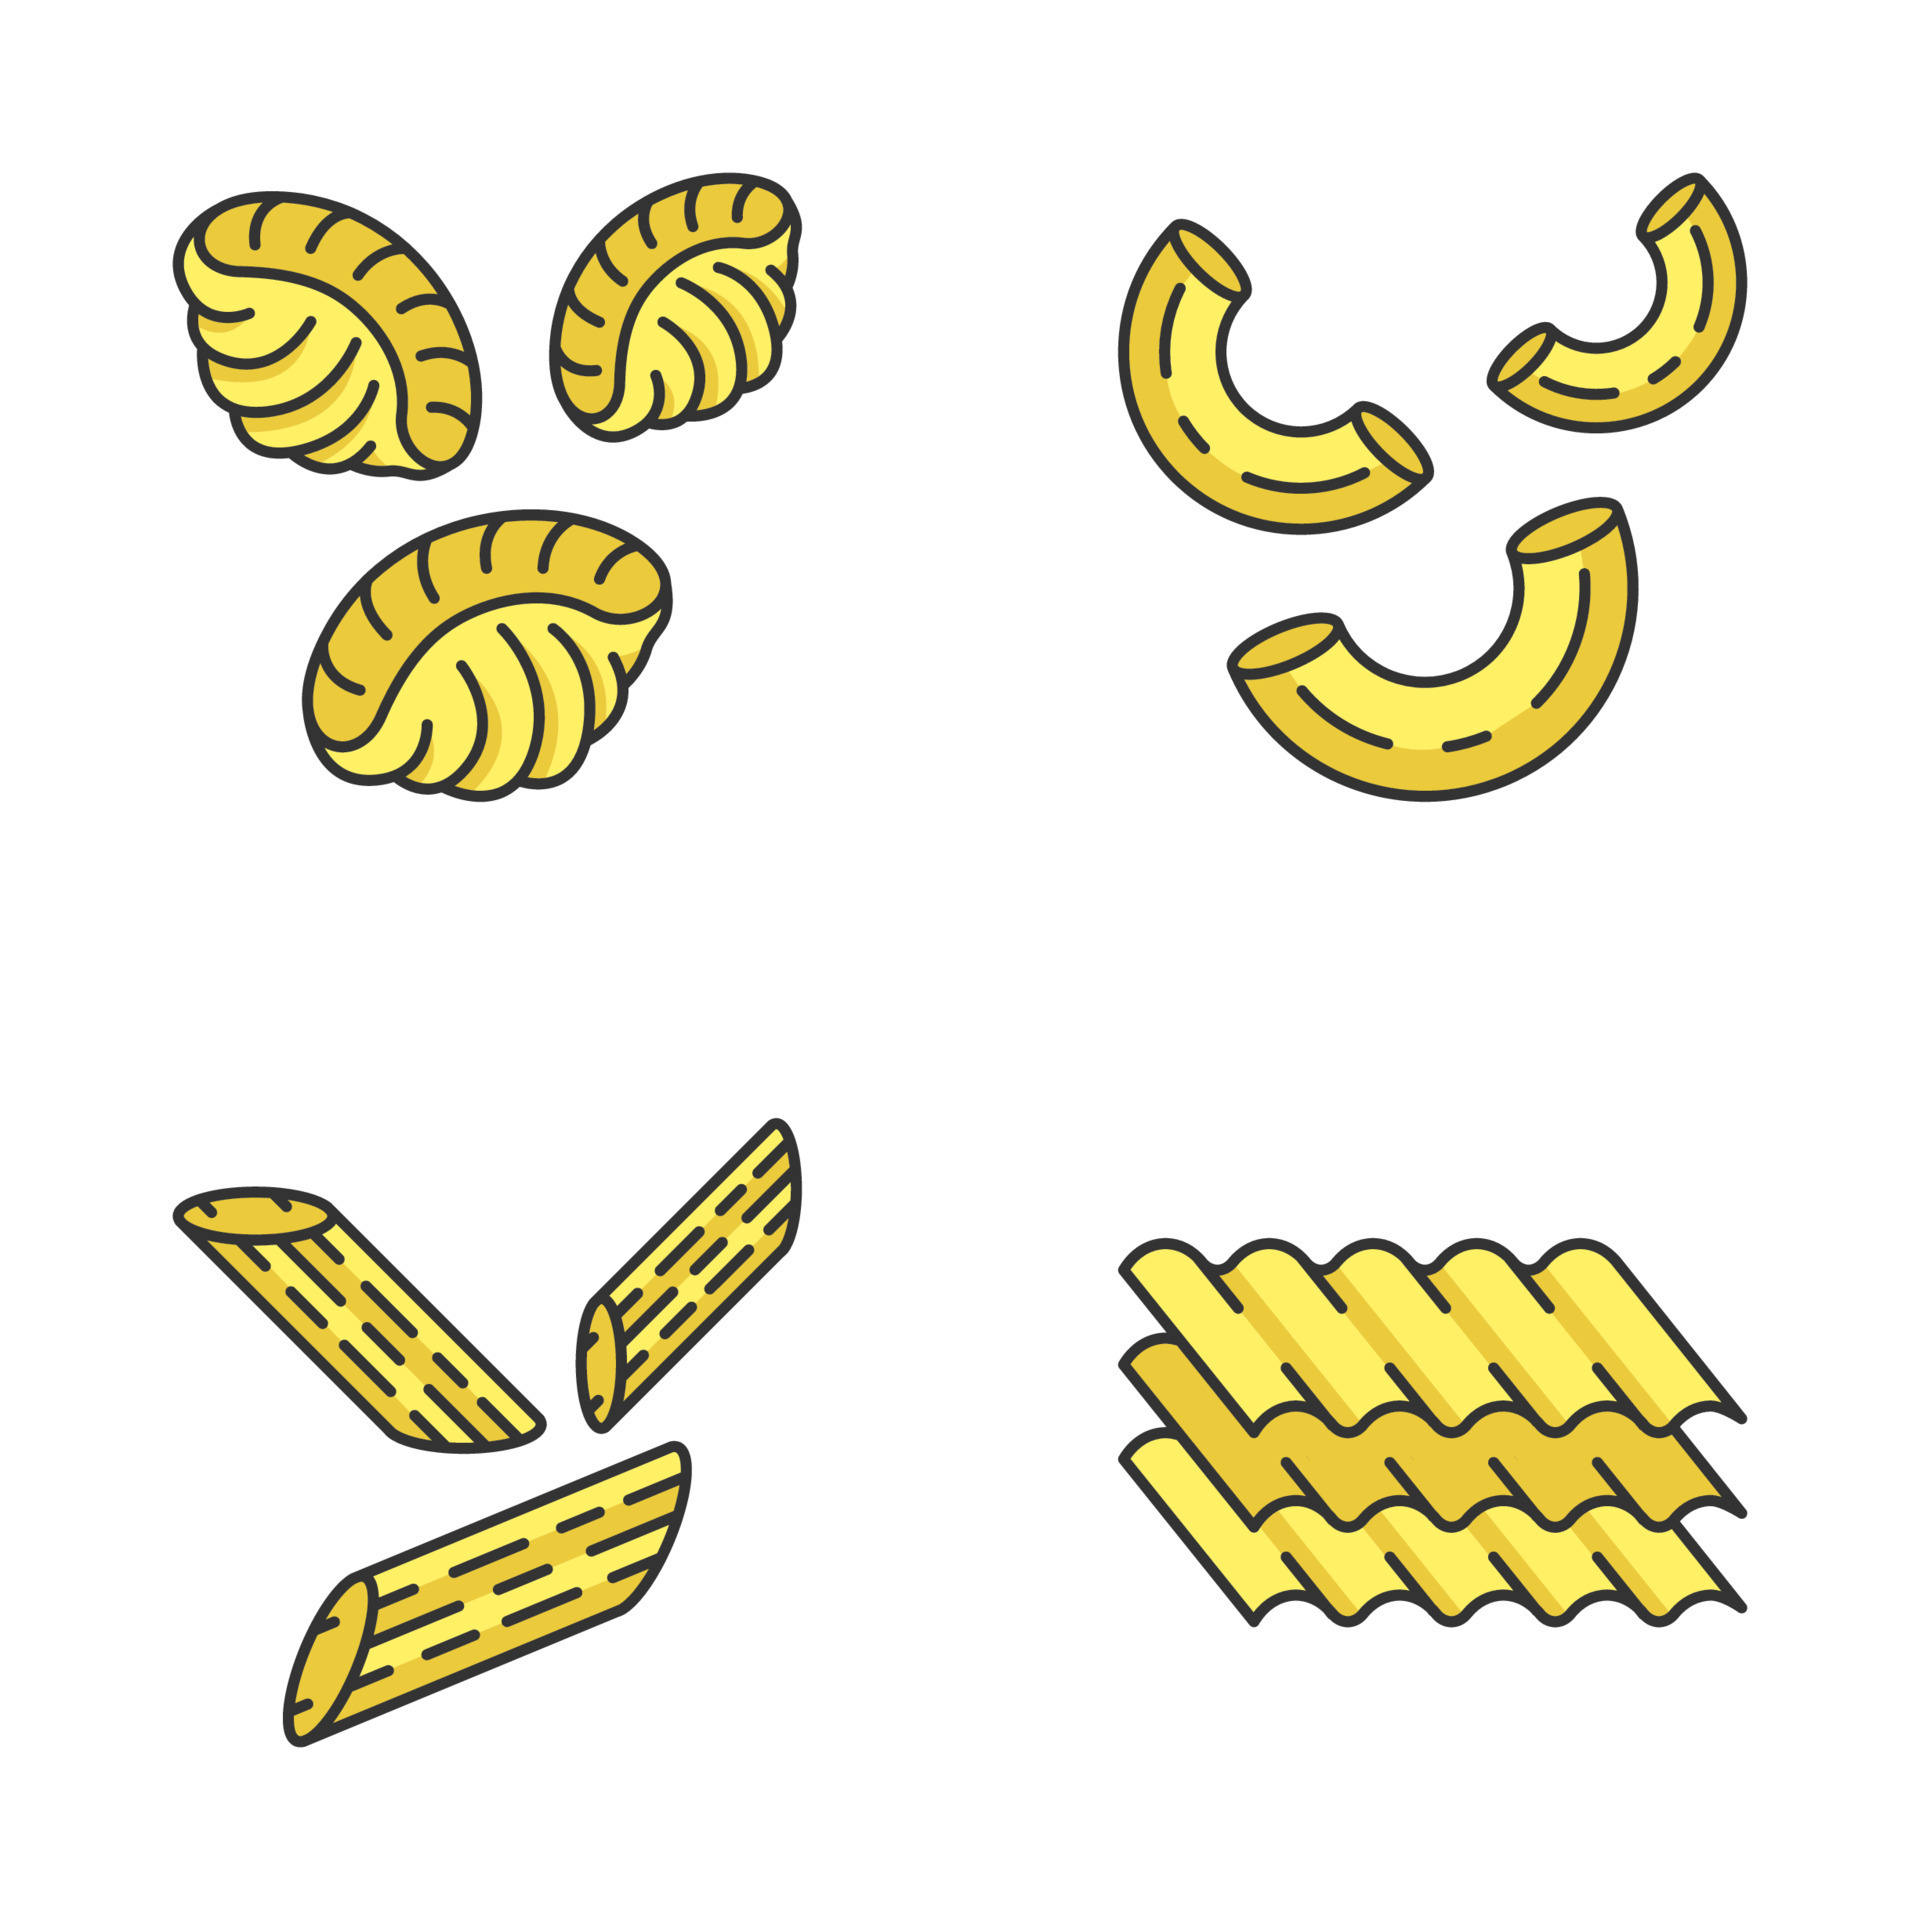 Various types and shapes pasta, noodles and macaroni with cereal ear  realistic vector illustration set isolated on white. Italian national  cuisine traditional ingredient. Natural healthy eating food Stock Vector